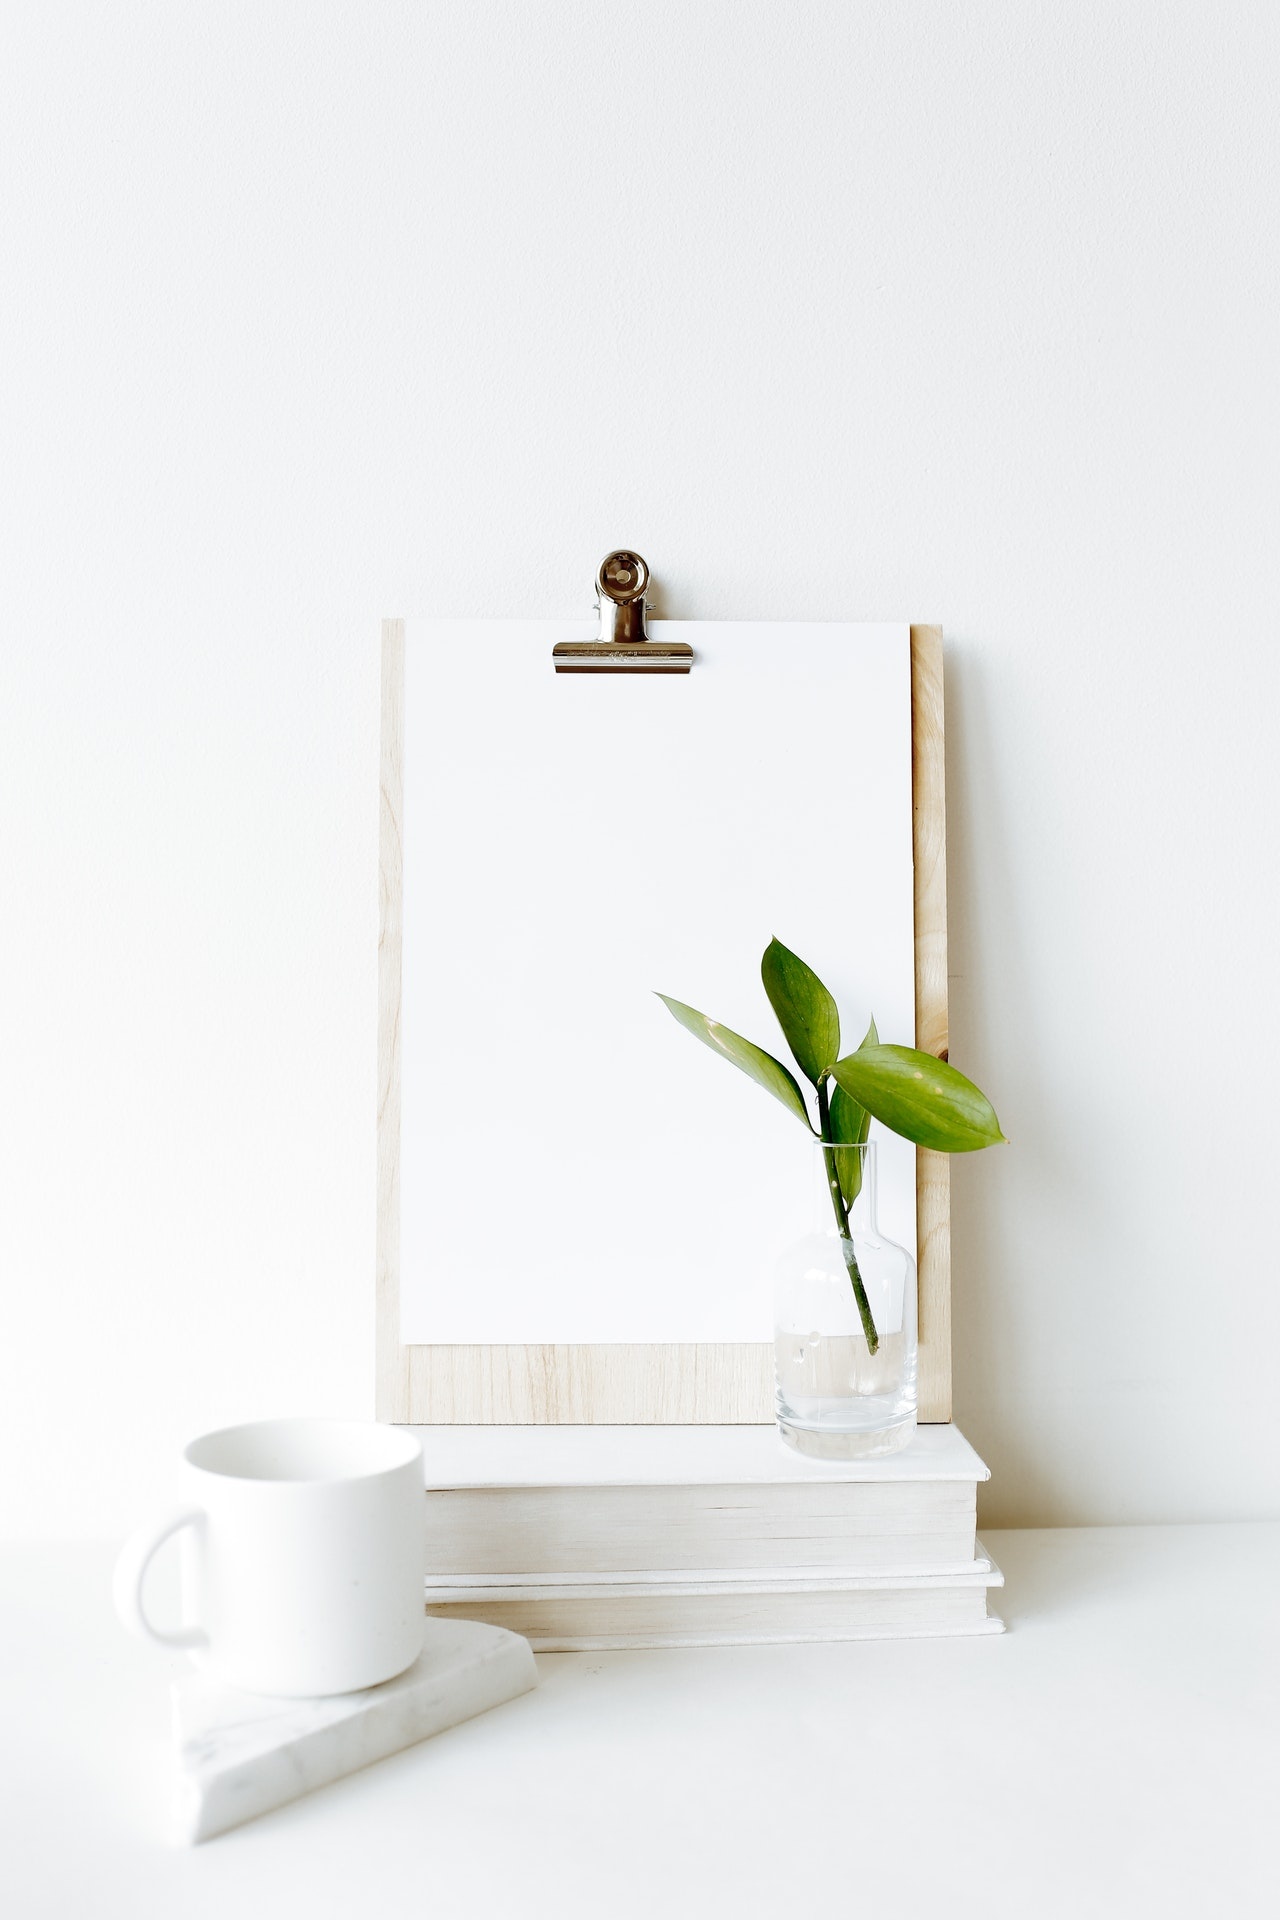 Minimalist photography, Artistic simplicity, Visual serenity, Composed frames, Pared-down captures, 1280x1920 HD Phone